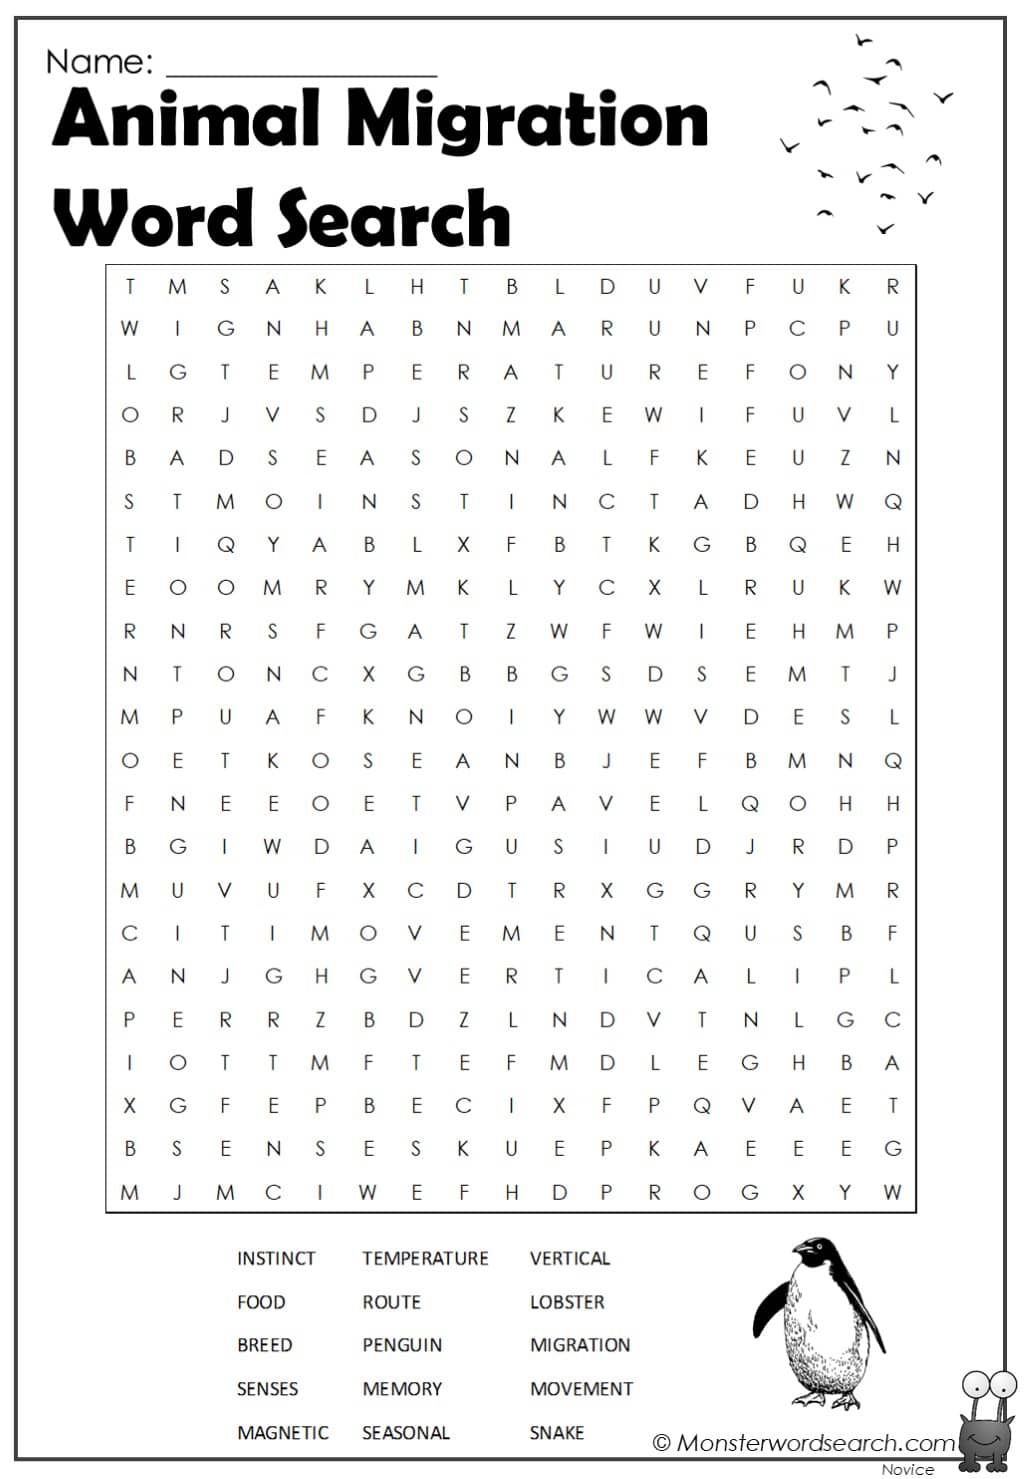 Animal Migration Word Search- Monster Word Search